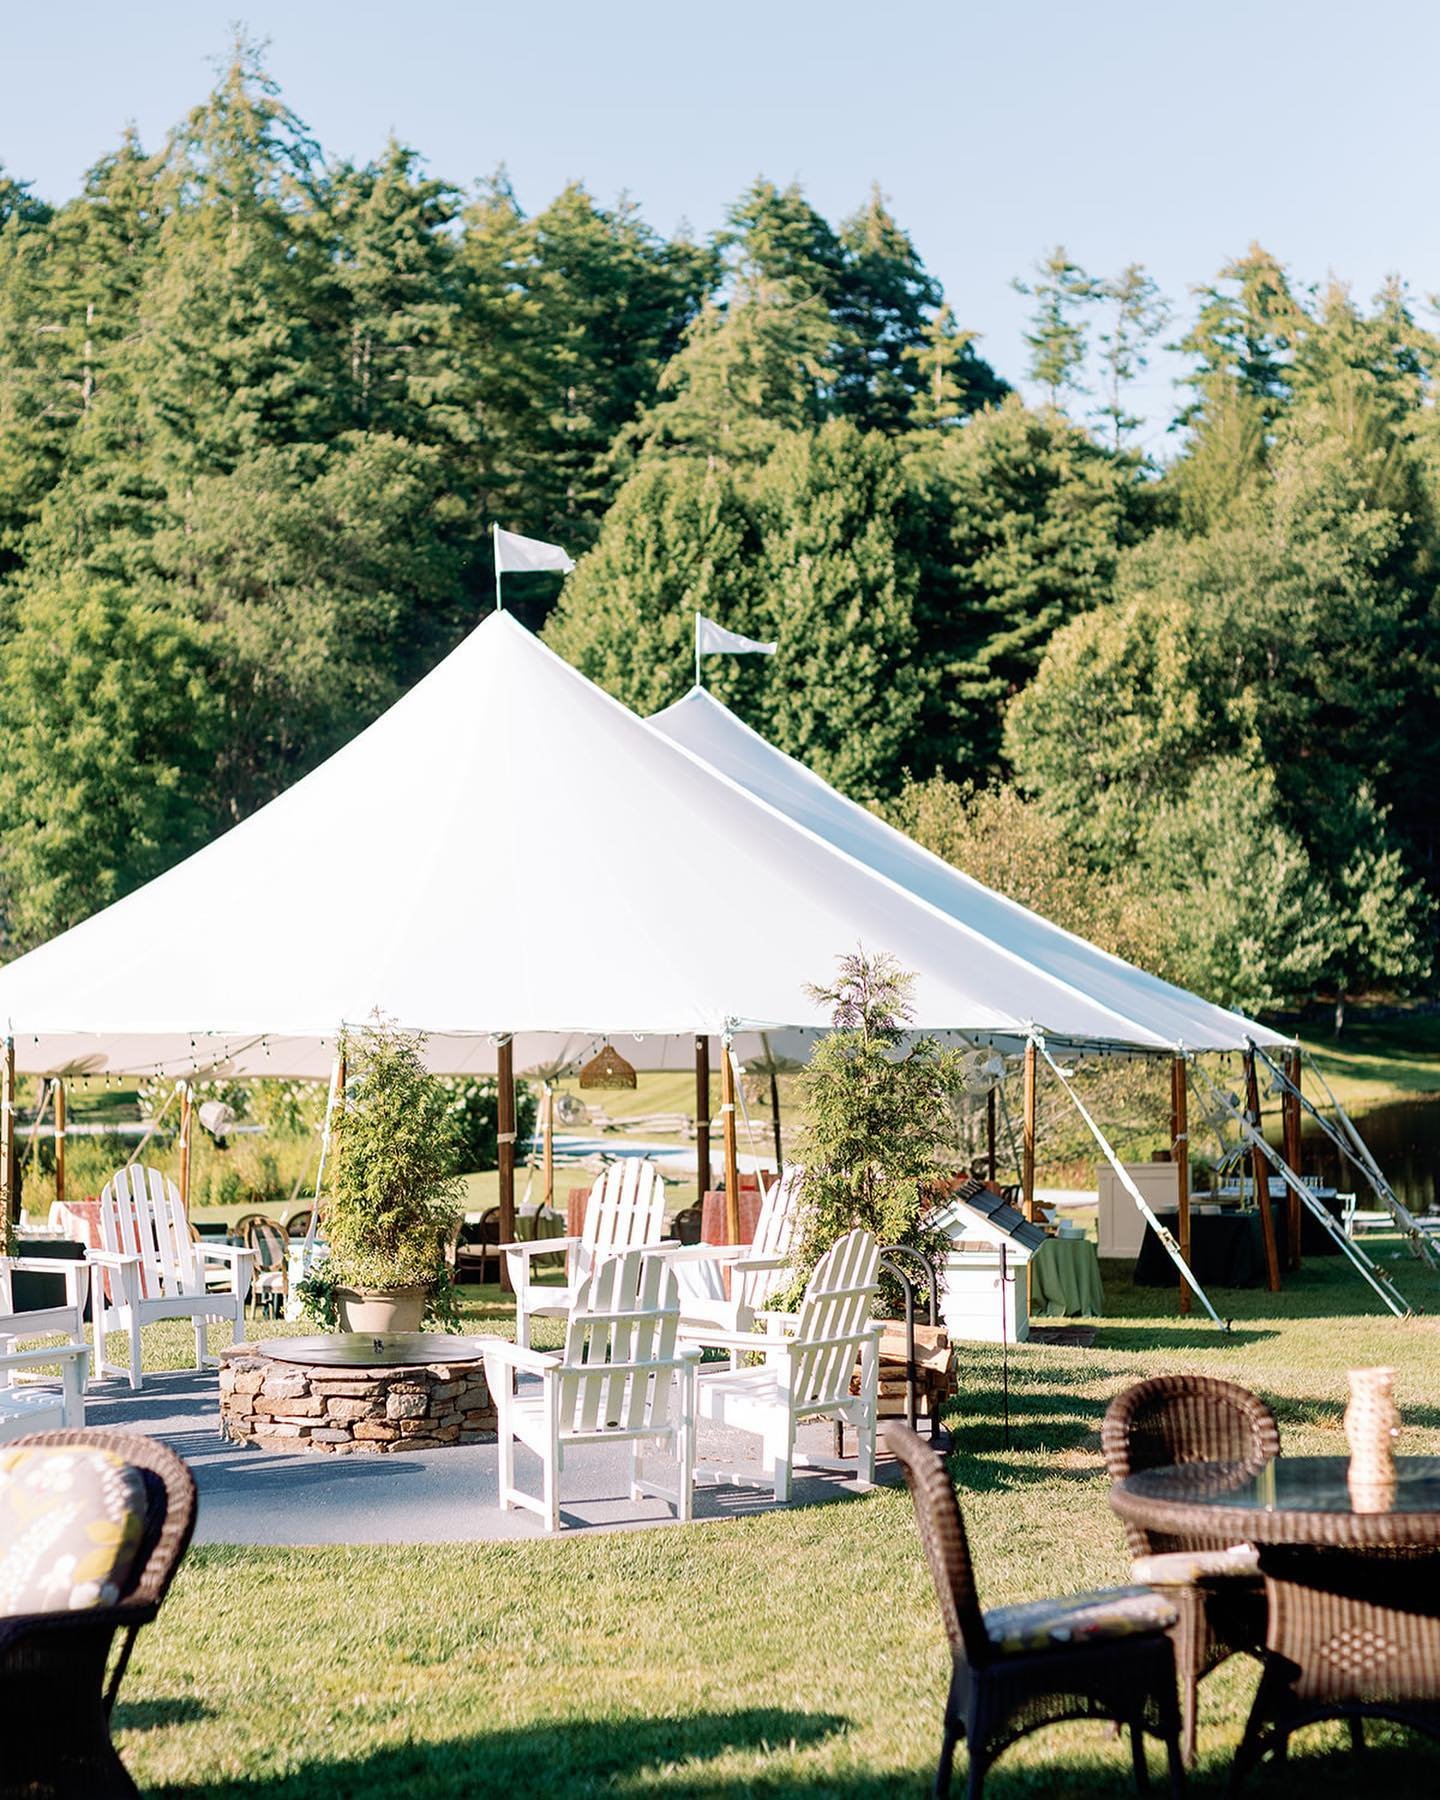 With summer just around the corner, we&rsquo;ve got tents, lounge seating, seasonal cocktails, and al fresco shindigs on the mind. We&rsquo;re gearing up for a return to Highlands next month and it&rsquo;s the perfect time to look back at Abby &amp; 